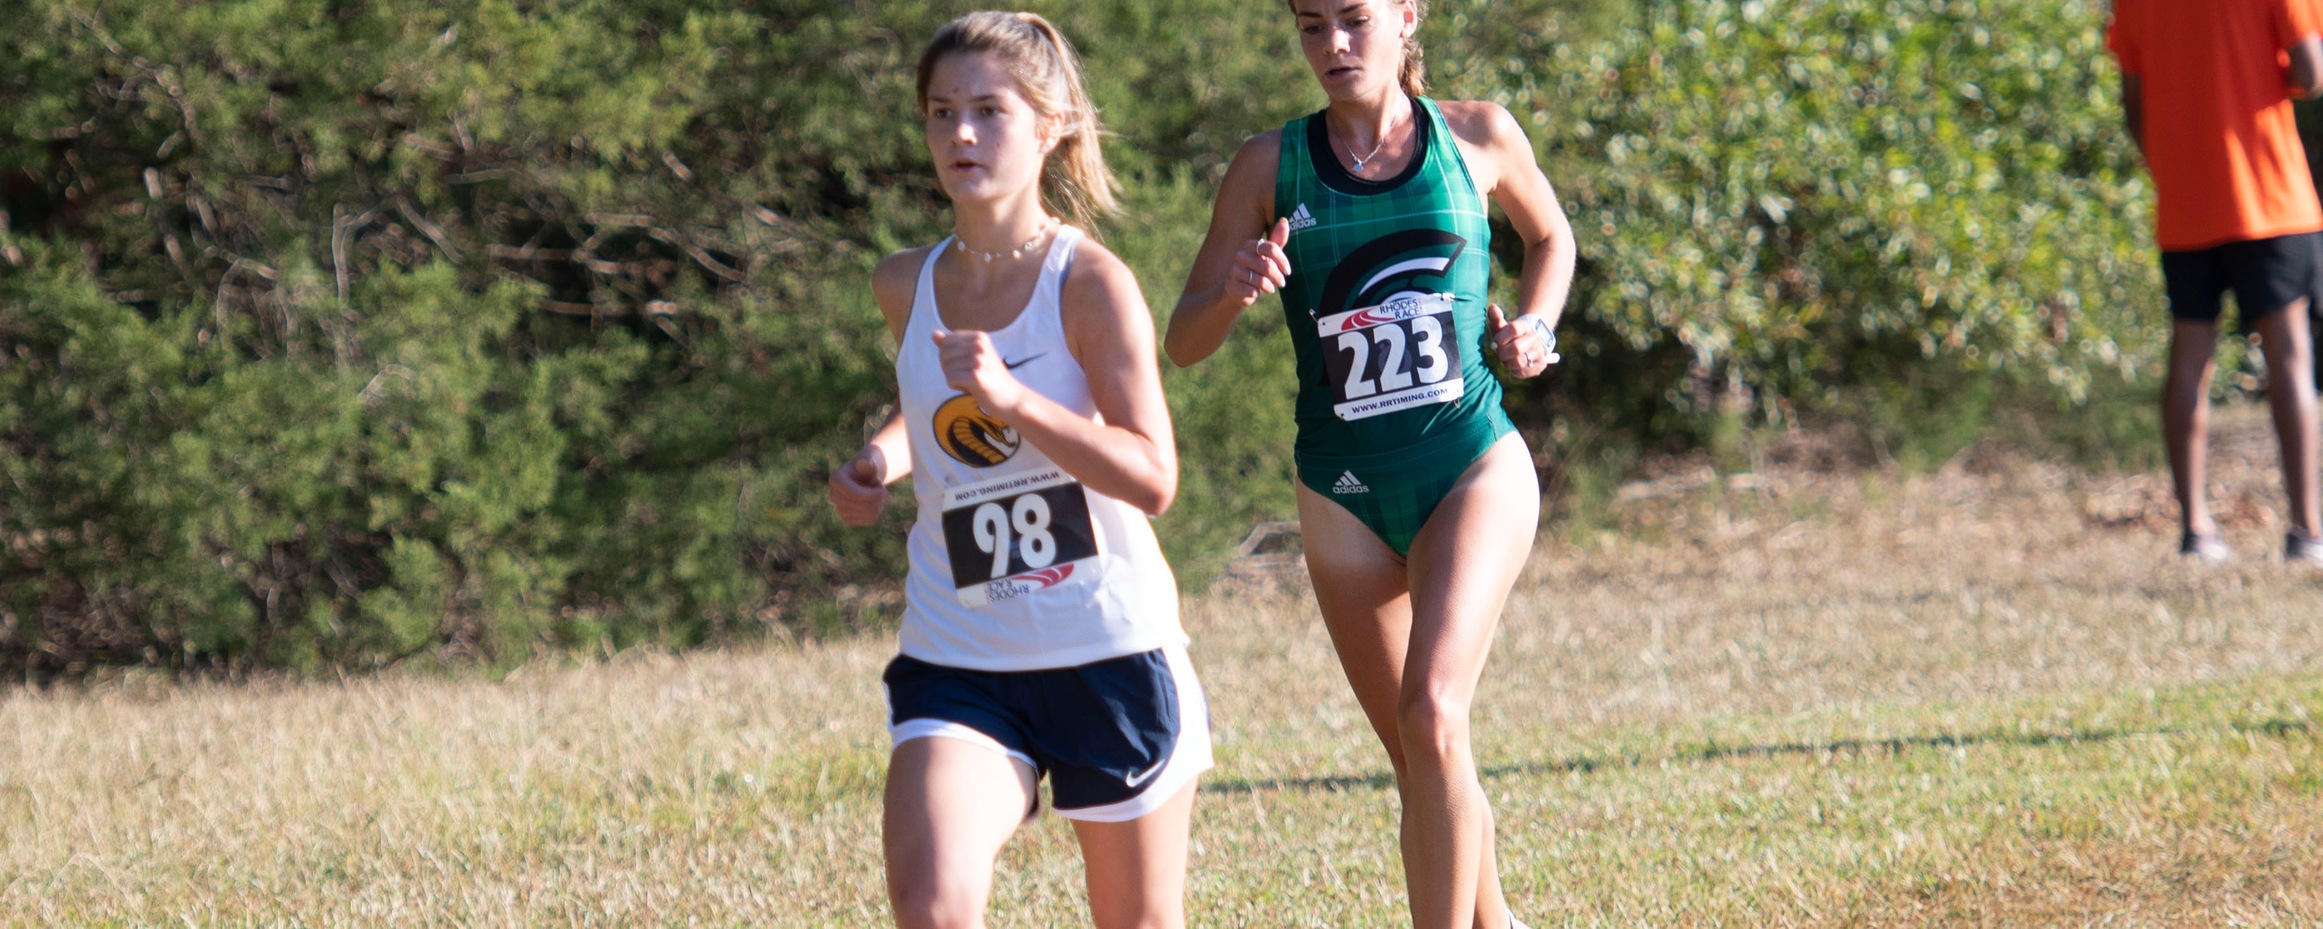 Like Places Tenth at Charleston Classic